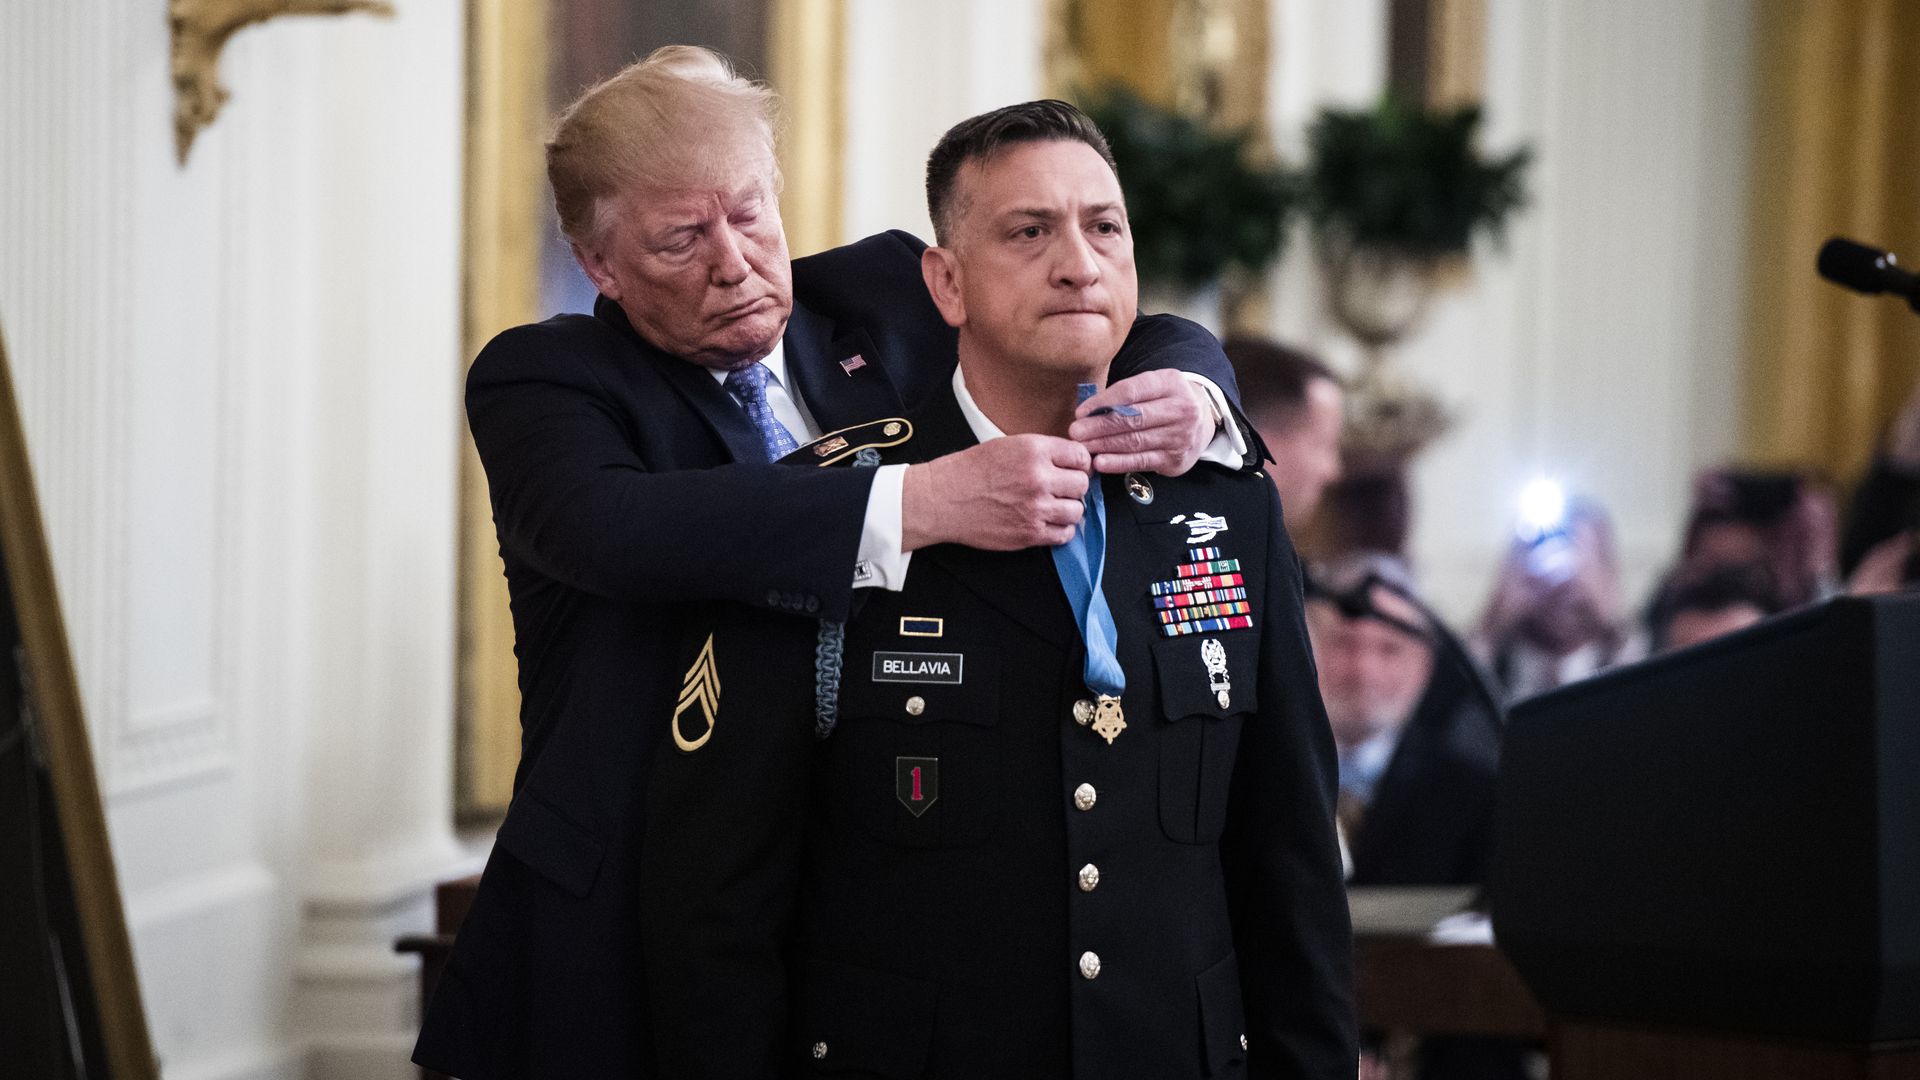 Iraq War Veteran Who Saved Squad Awarded Medal Of Honor By Trump